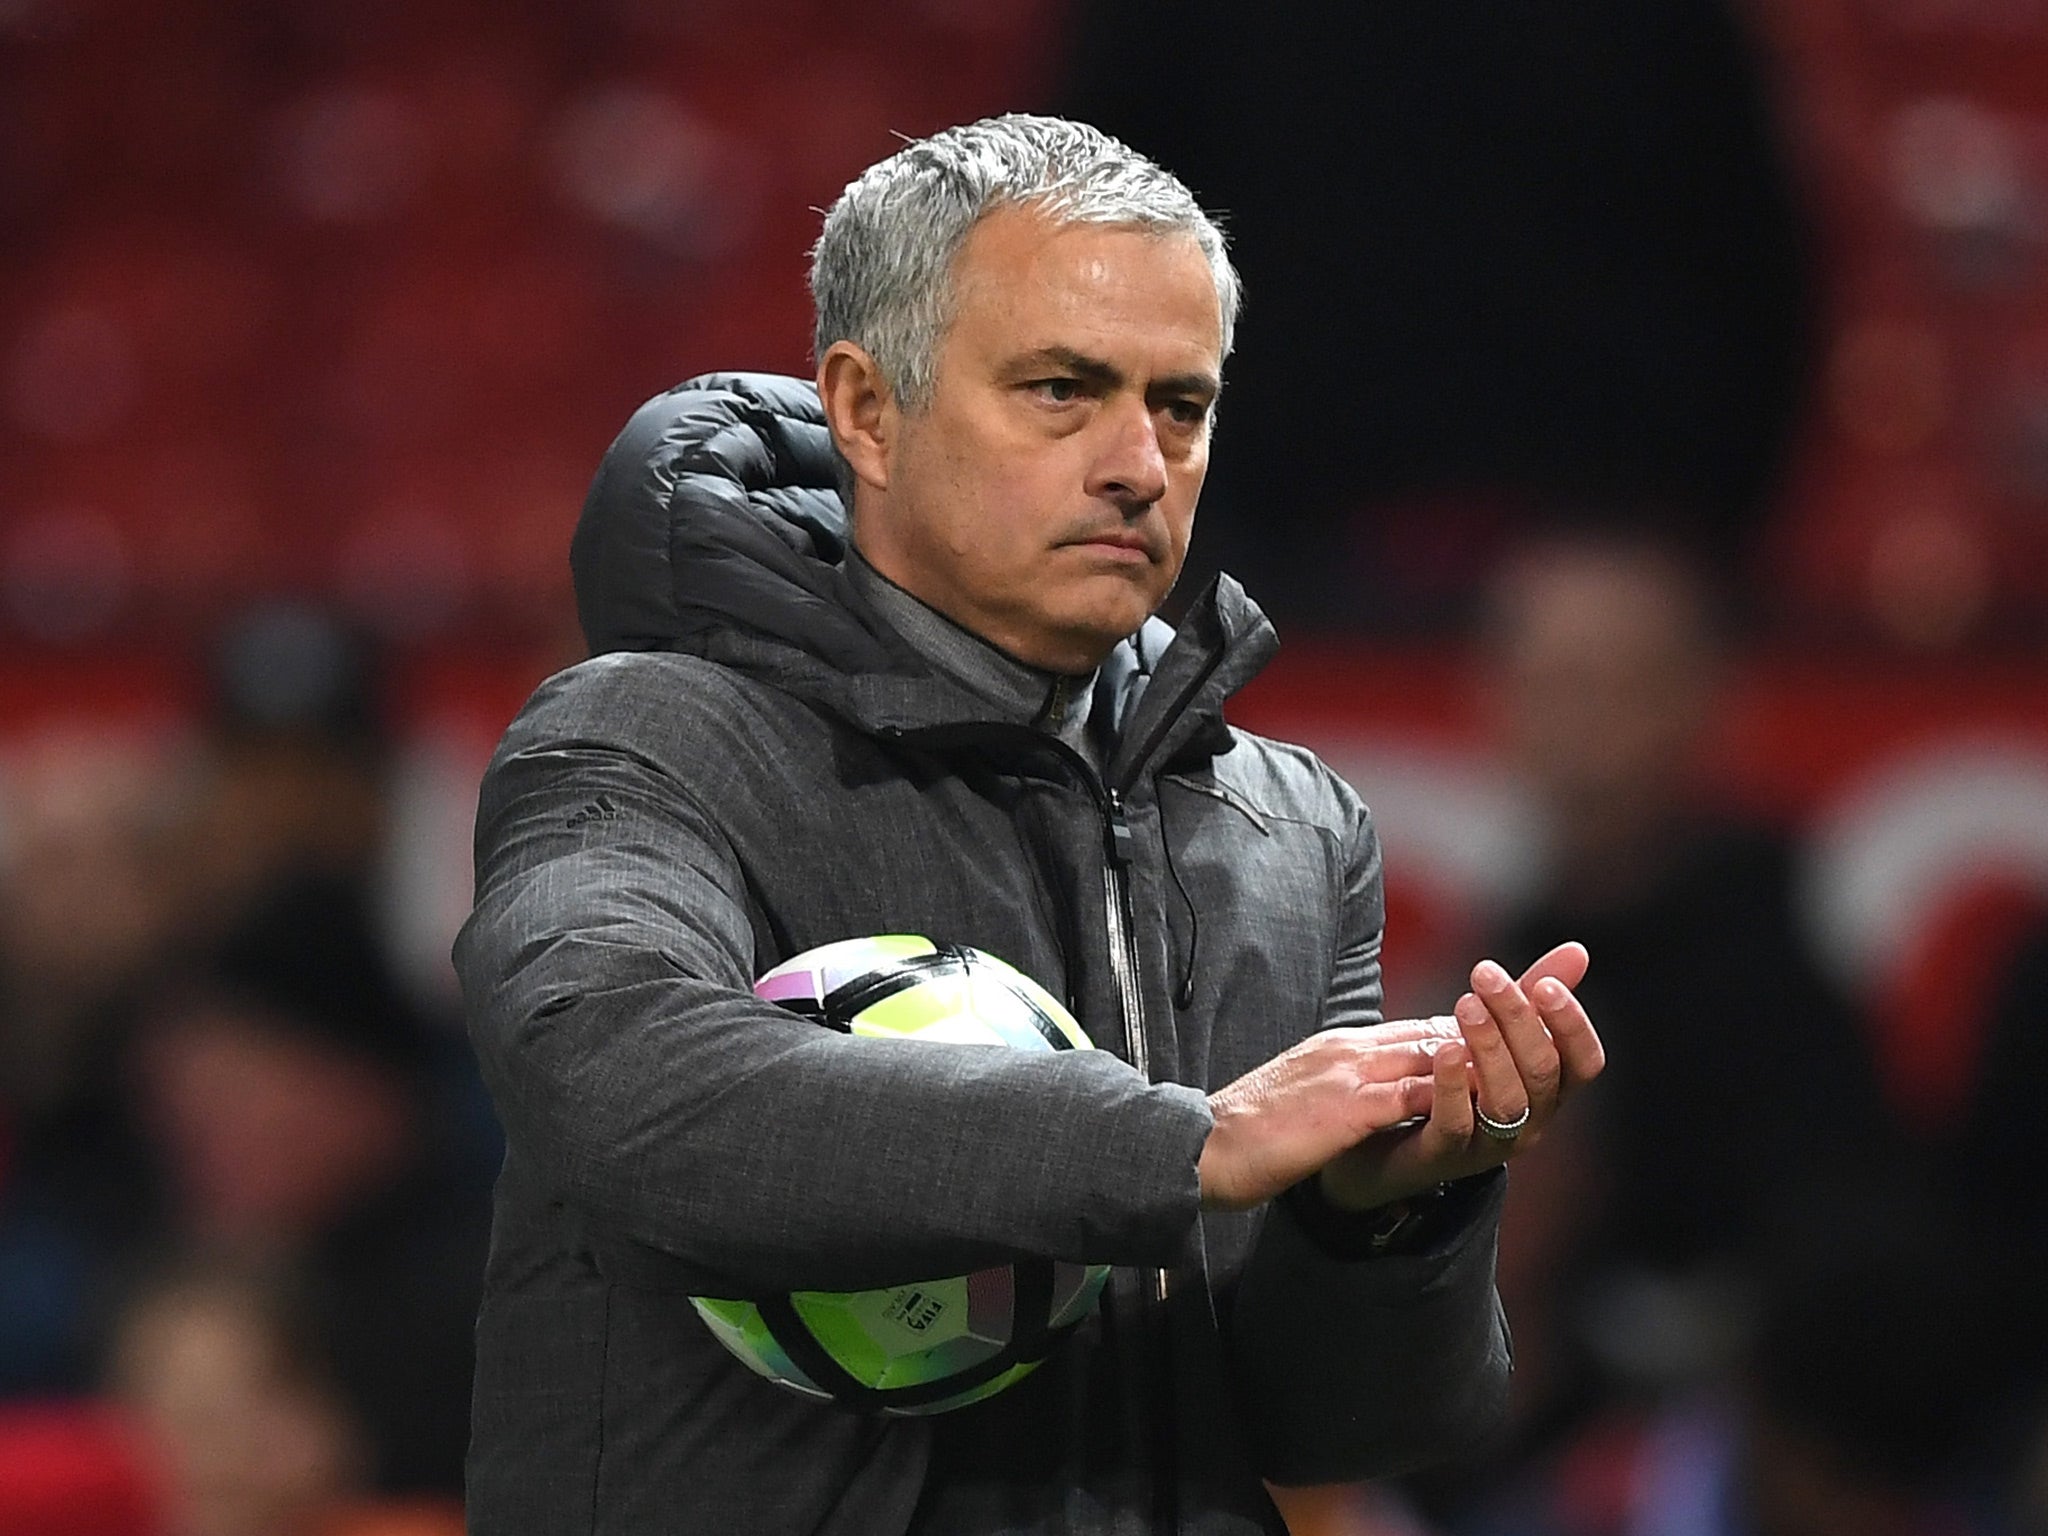 Jose Mourinho accepts that his team simply has not scored enough this season